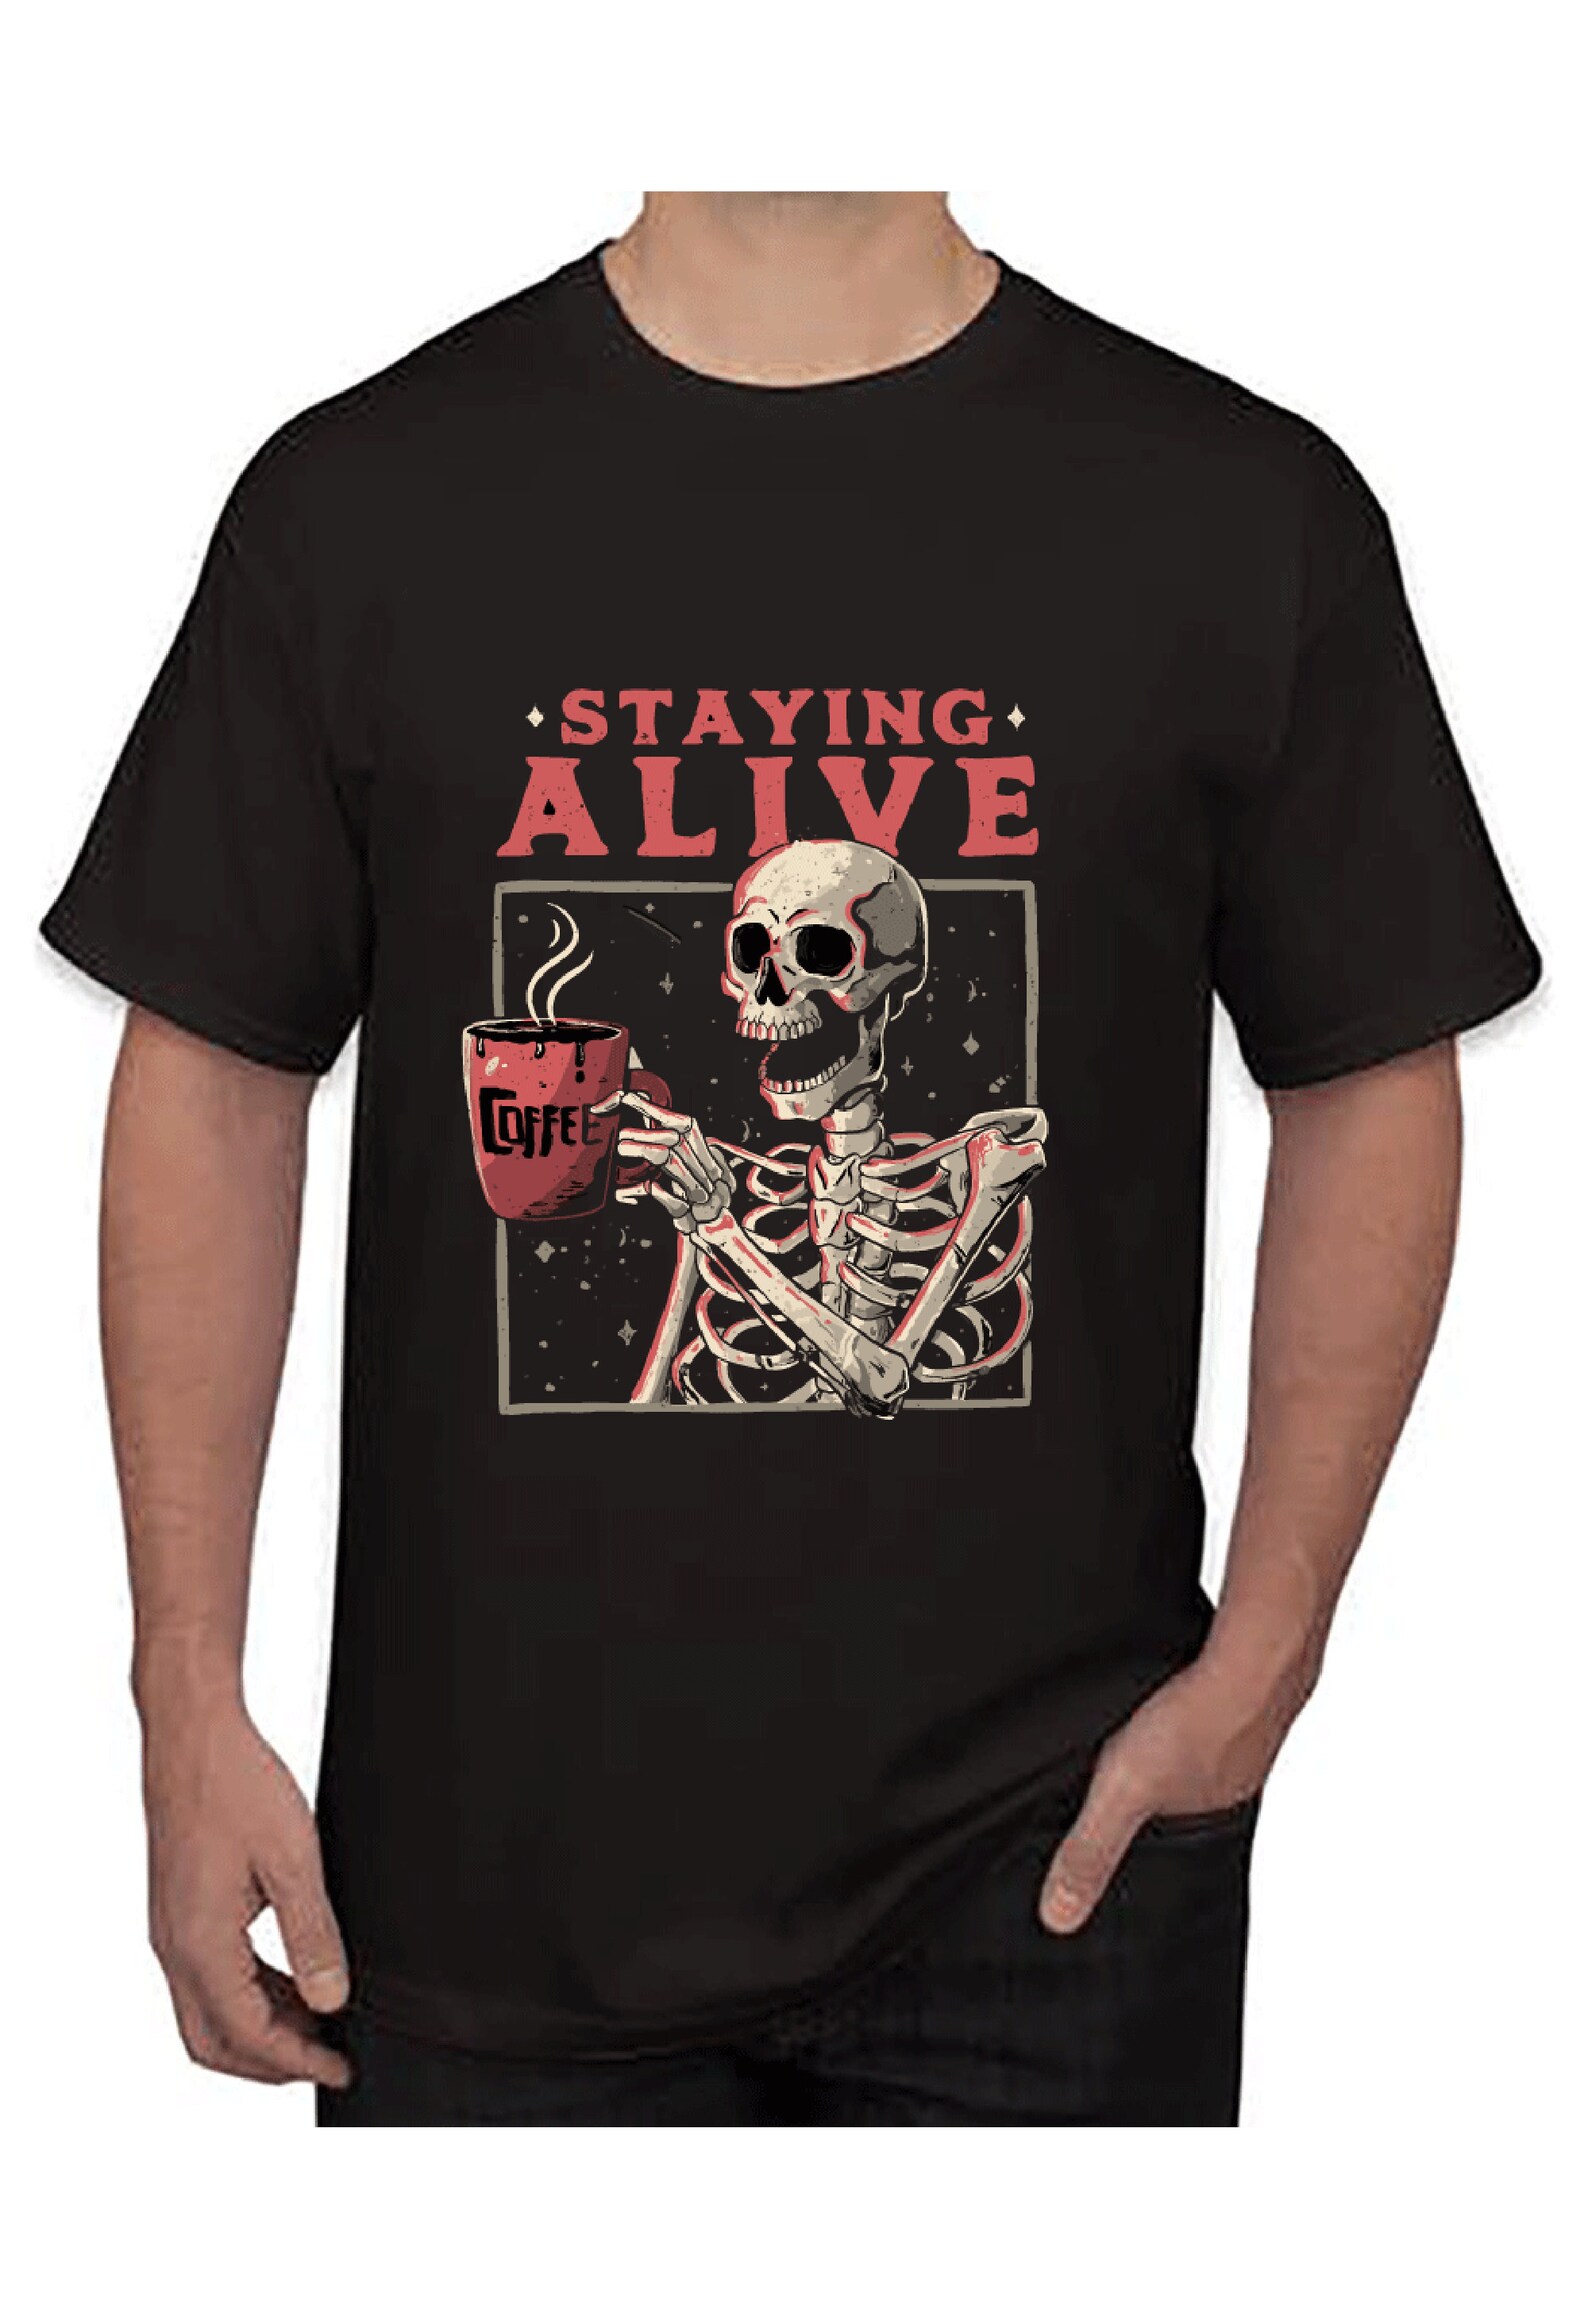 Staying Alive Skeleton Coffee T-shirt Tee Shirt Top High | Etsy